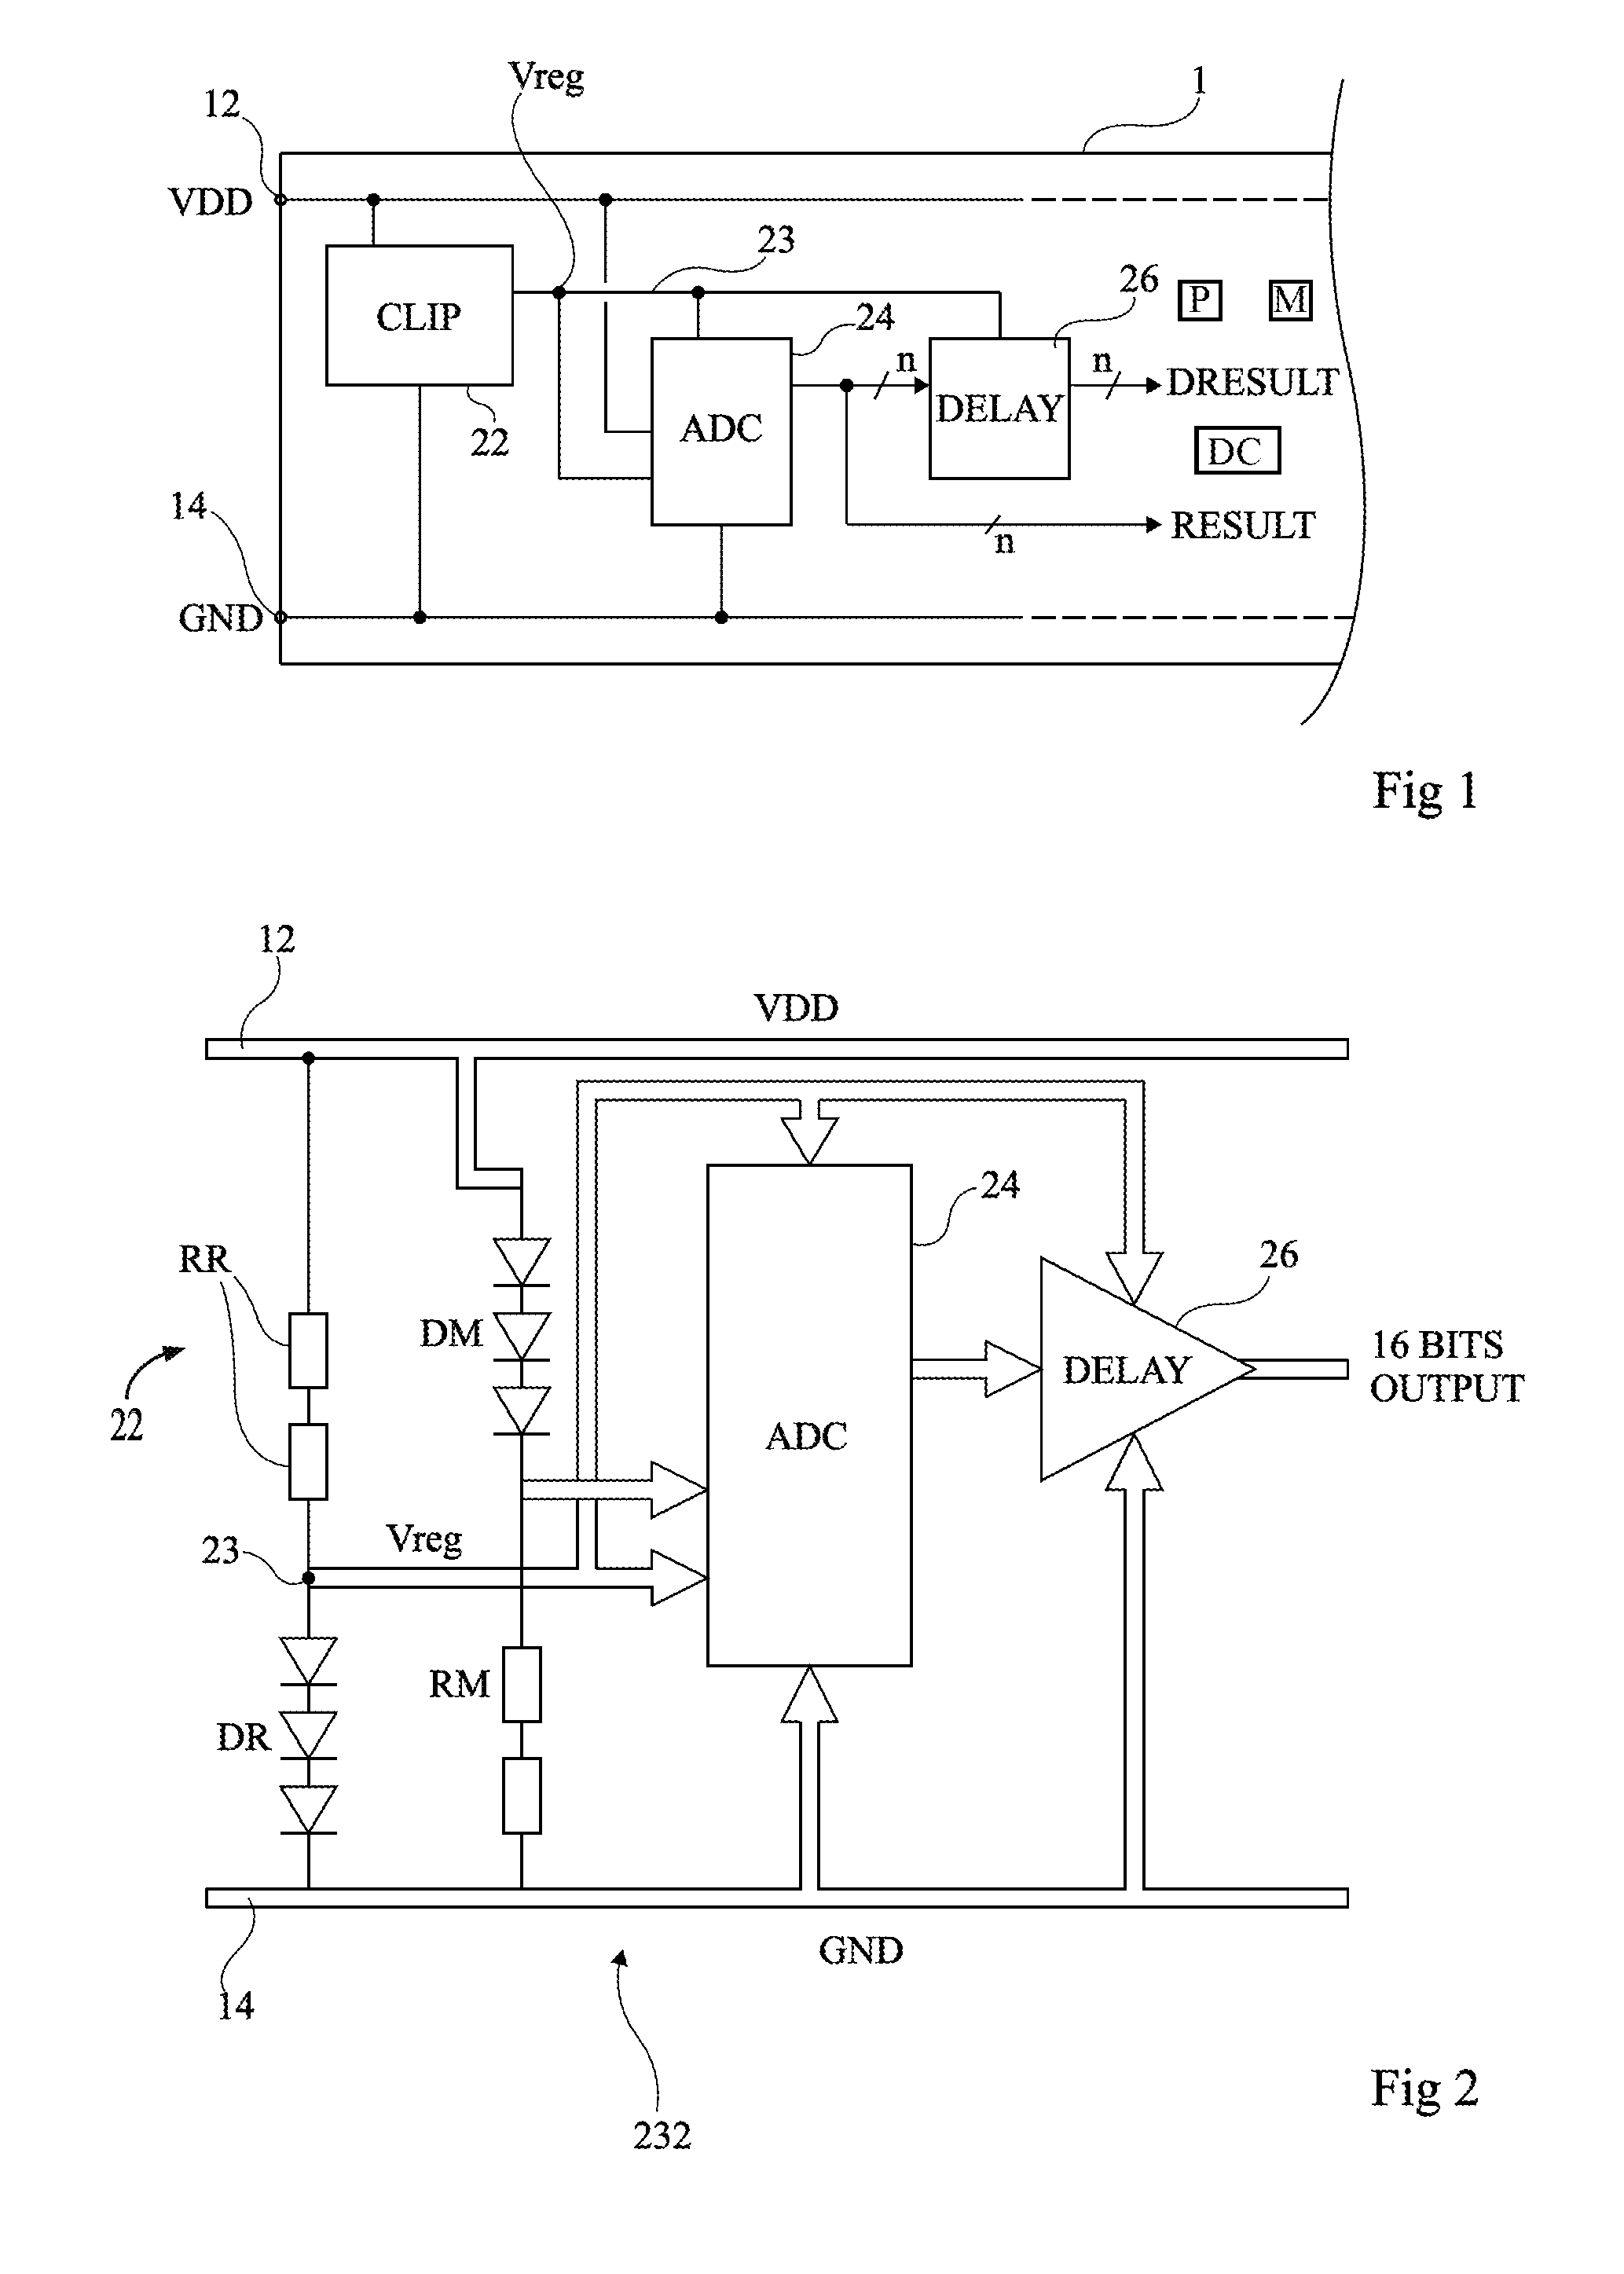 Measurement of variations of a power supply voltage